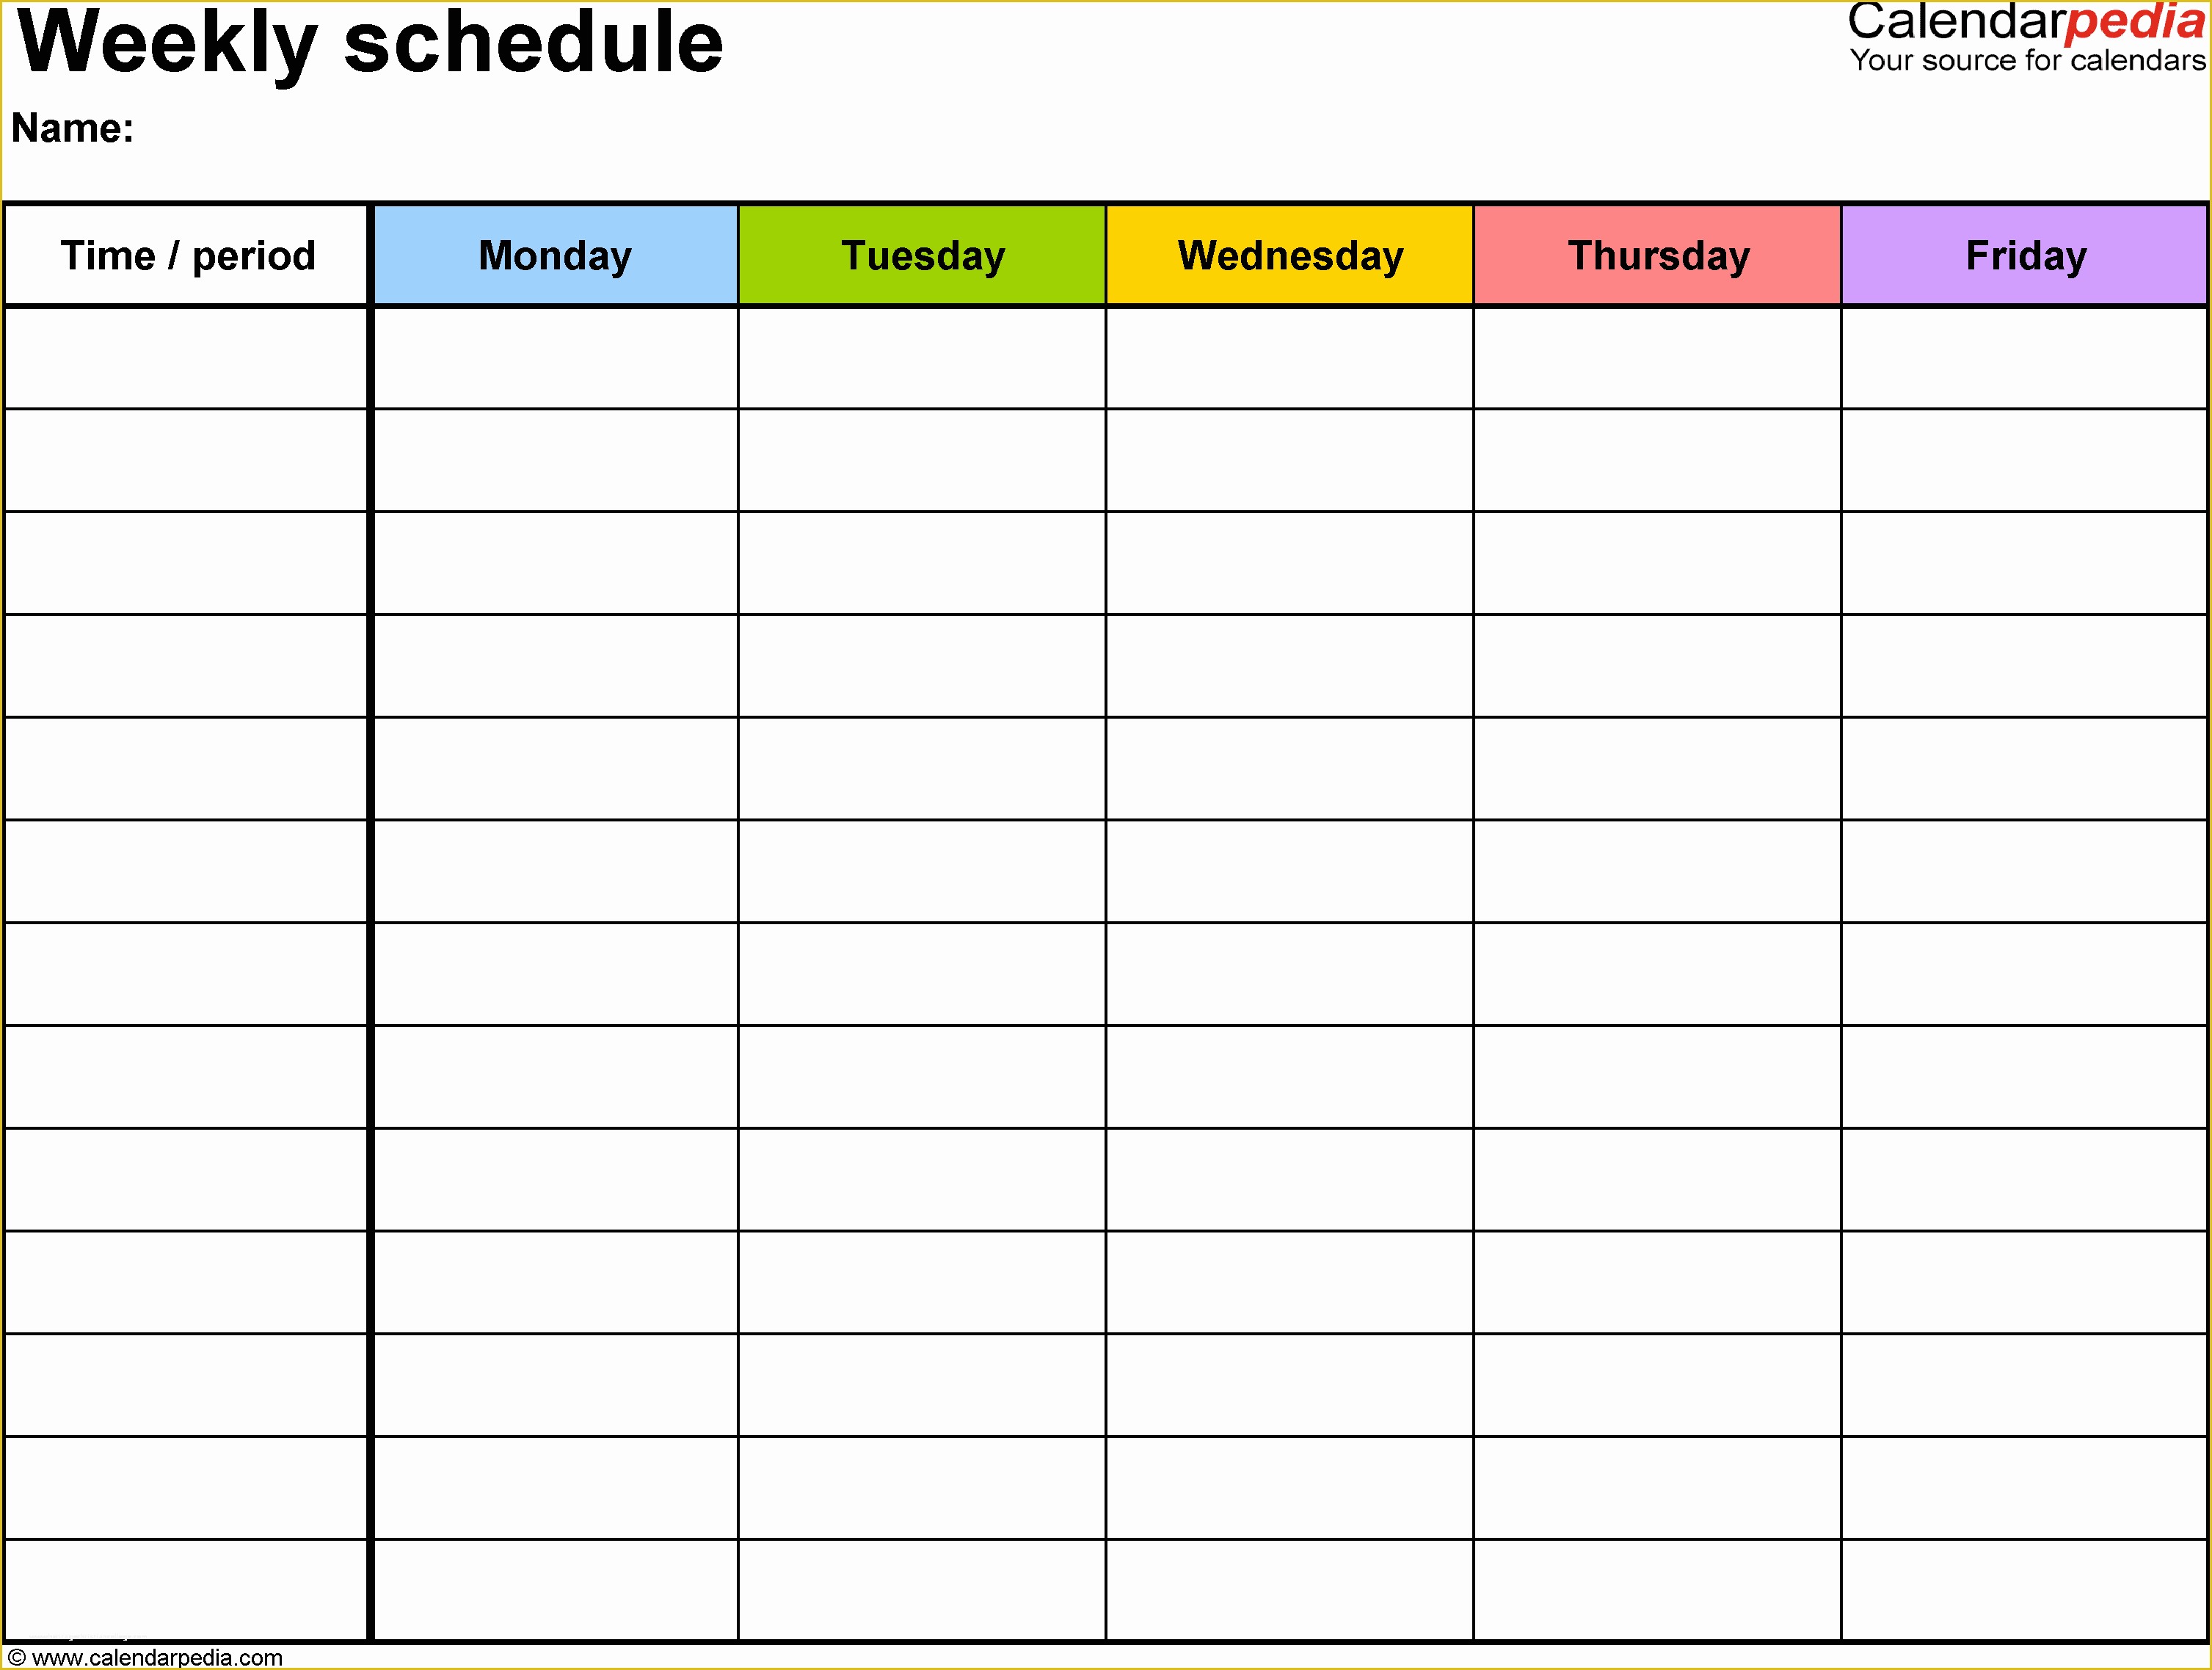 Holiday Schedule Template Free Of April 2017 Calendar with Holidays